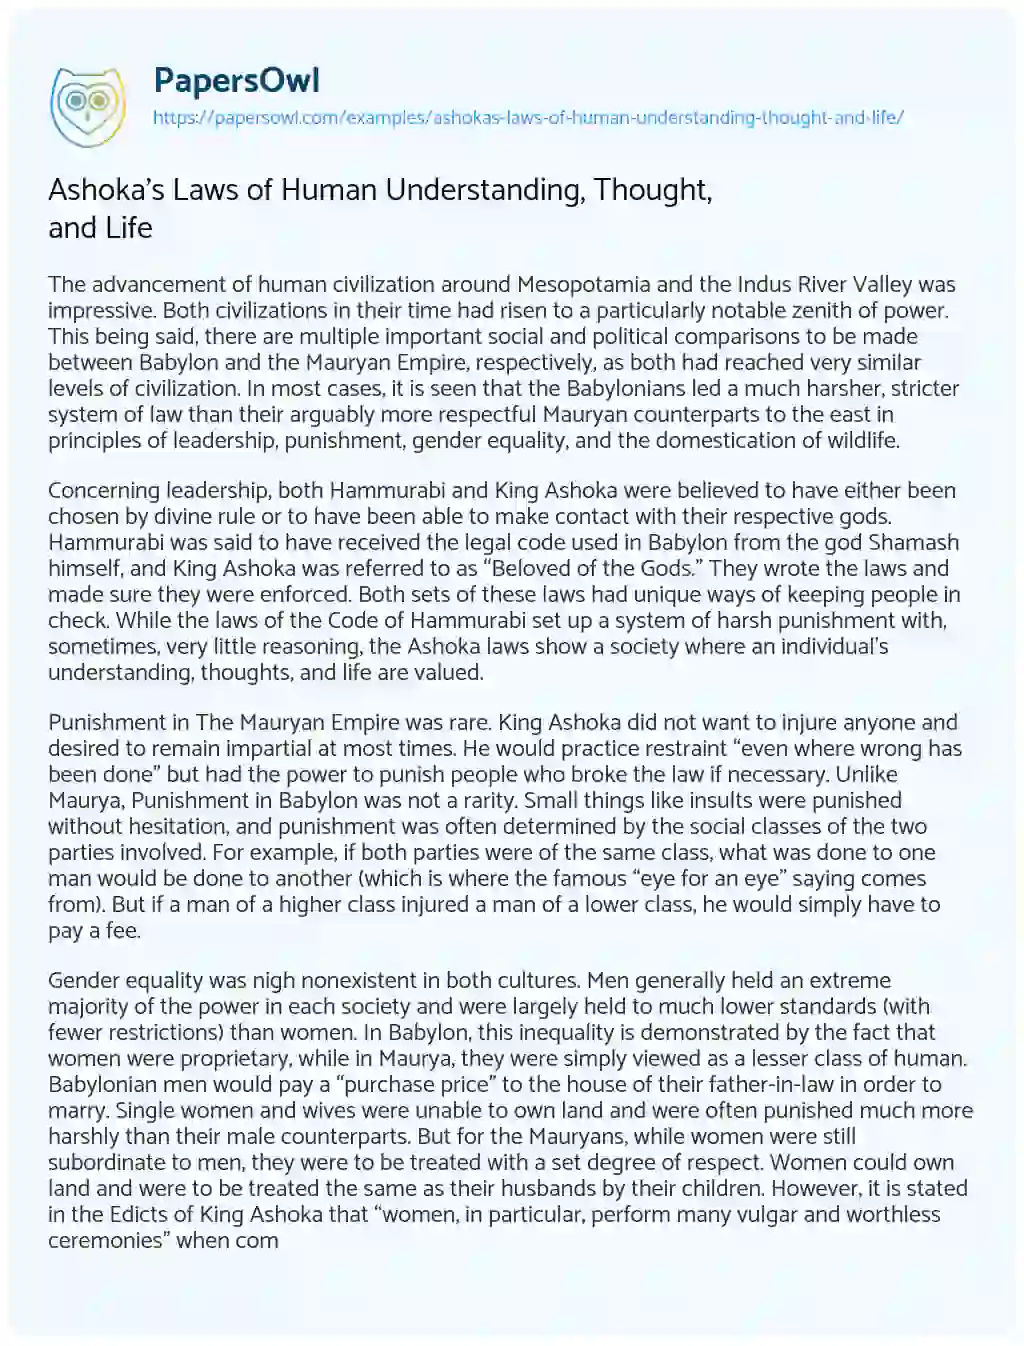 Essay on Ashoka’s Laws of Human Understanding, Thought, and Life